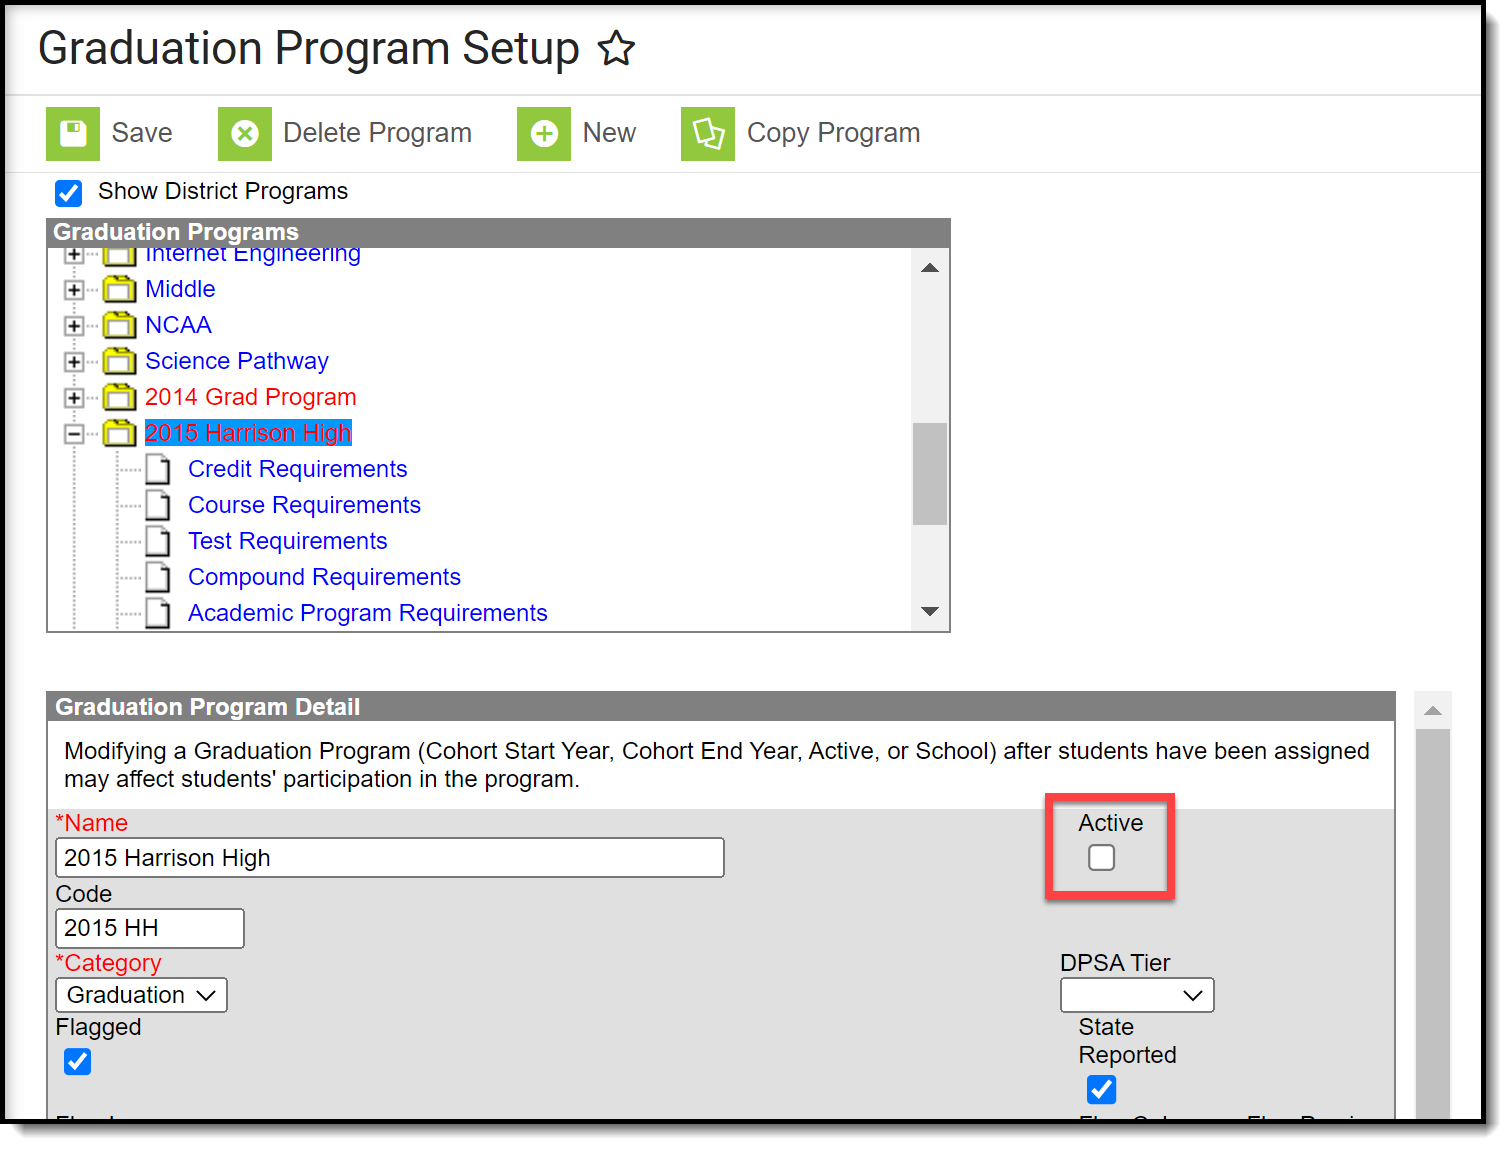 Screenshot of the Active checkbox not being marked on the Graduation Program Detail. 